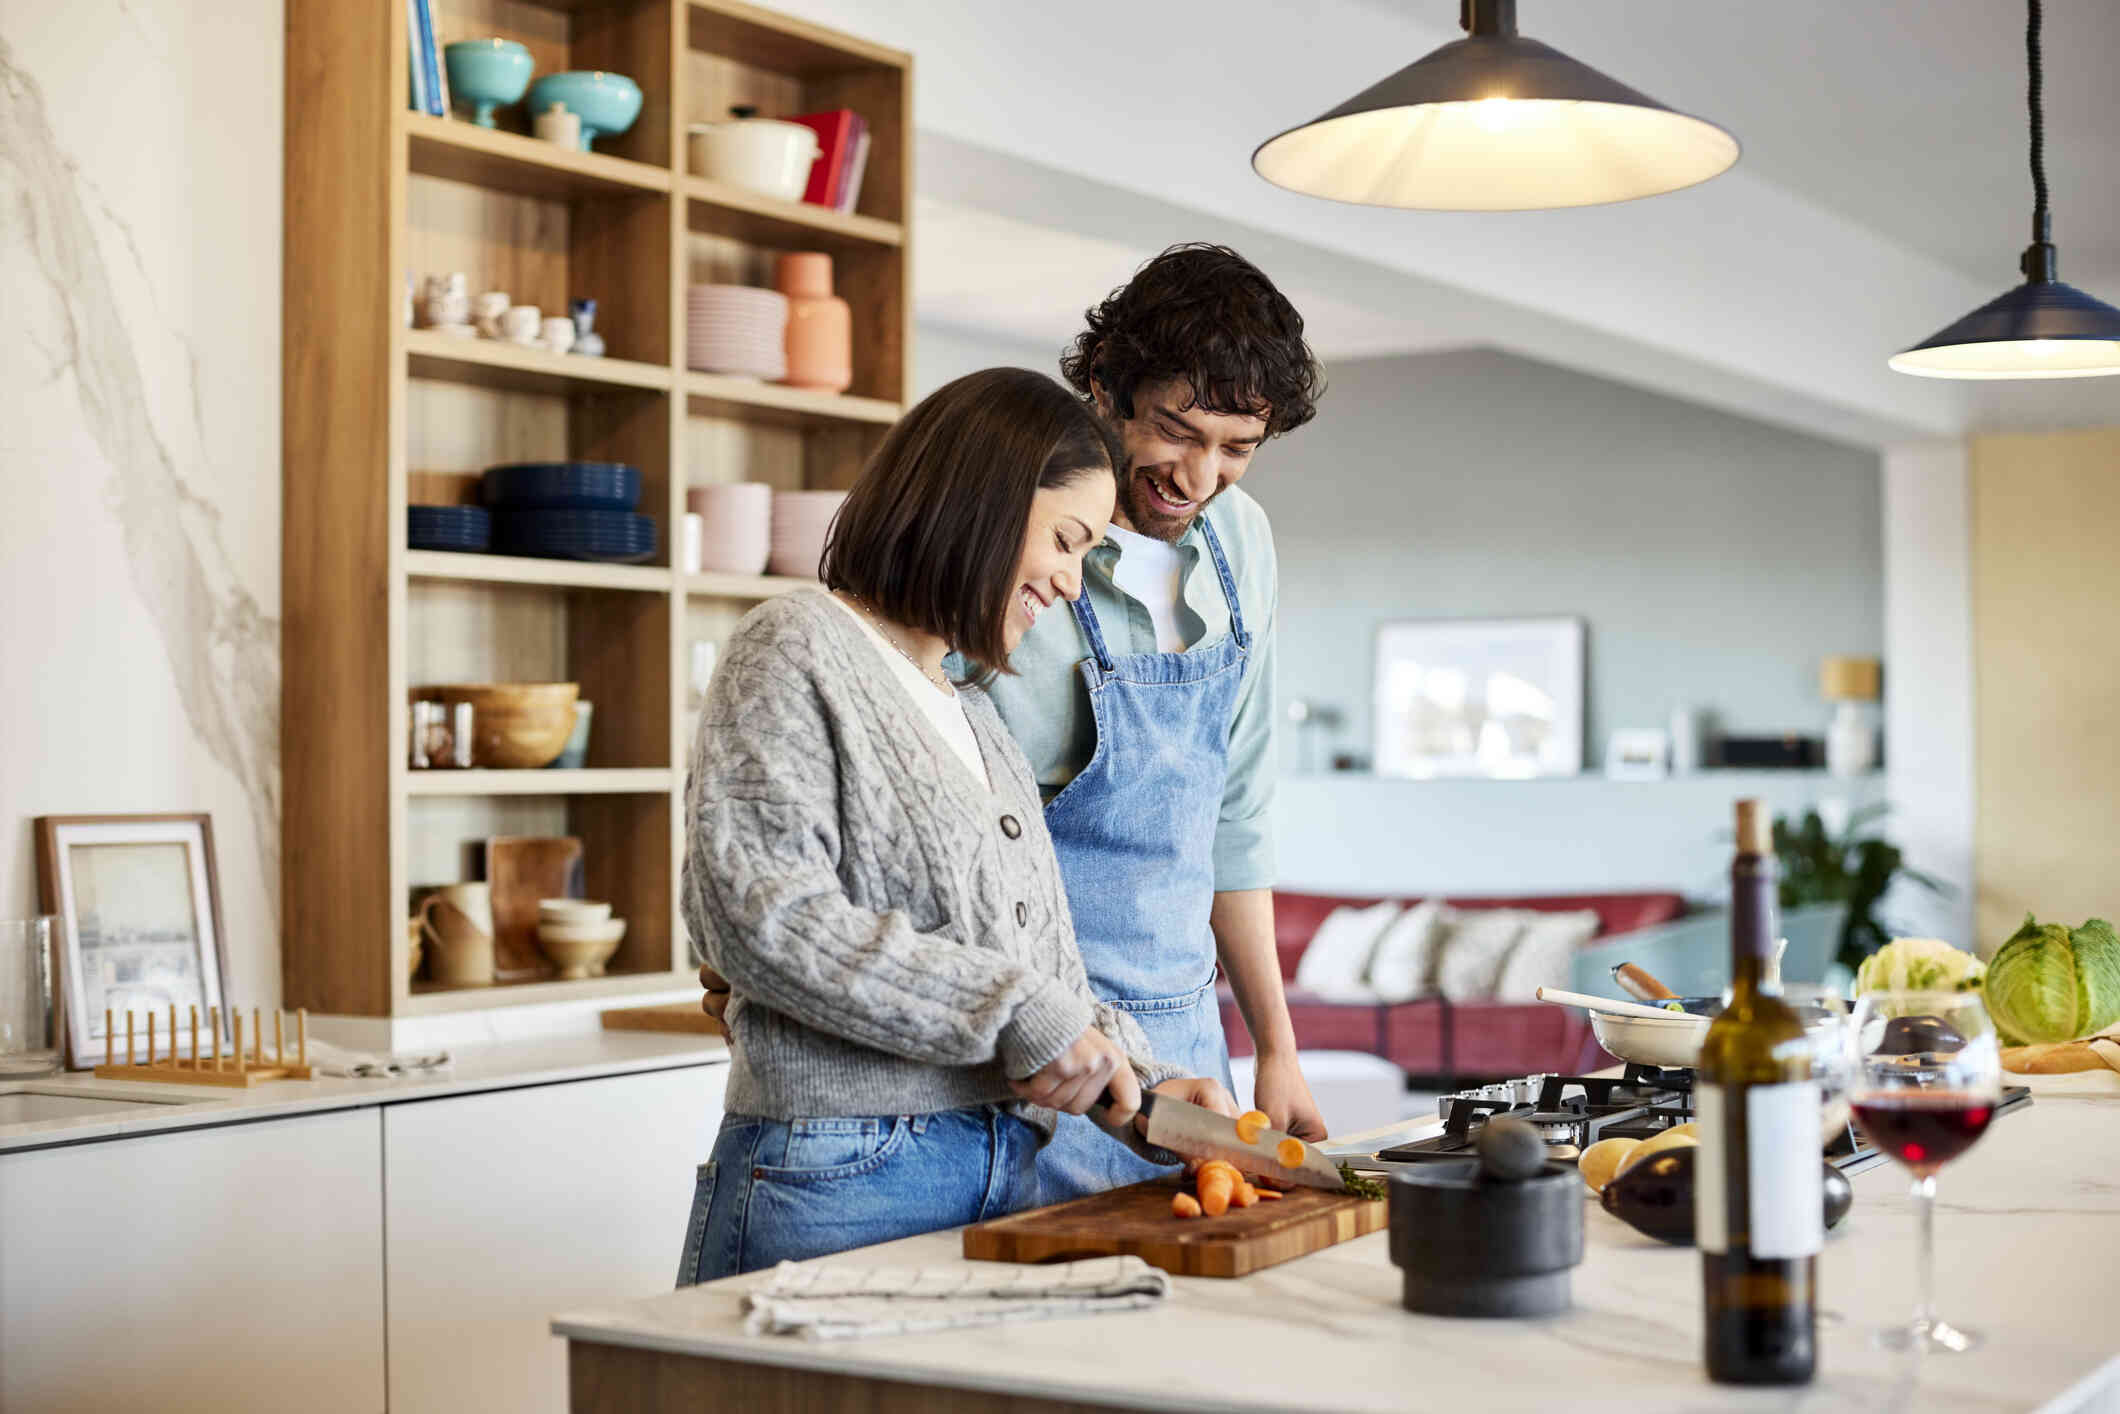 A male and female couple stand side by side in the kitchen and cook dinner together while smiling.